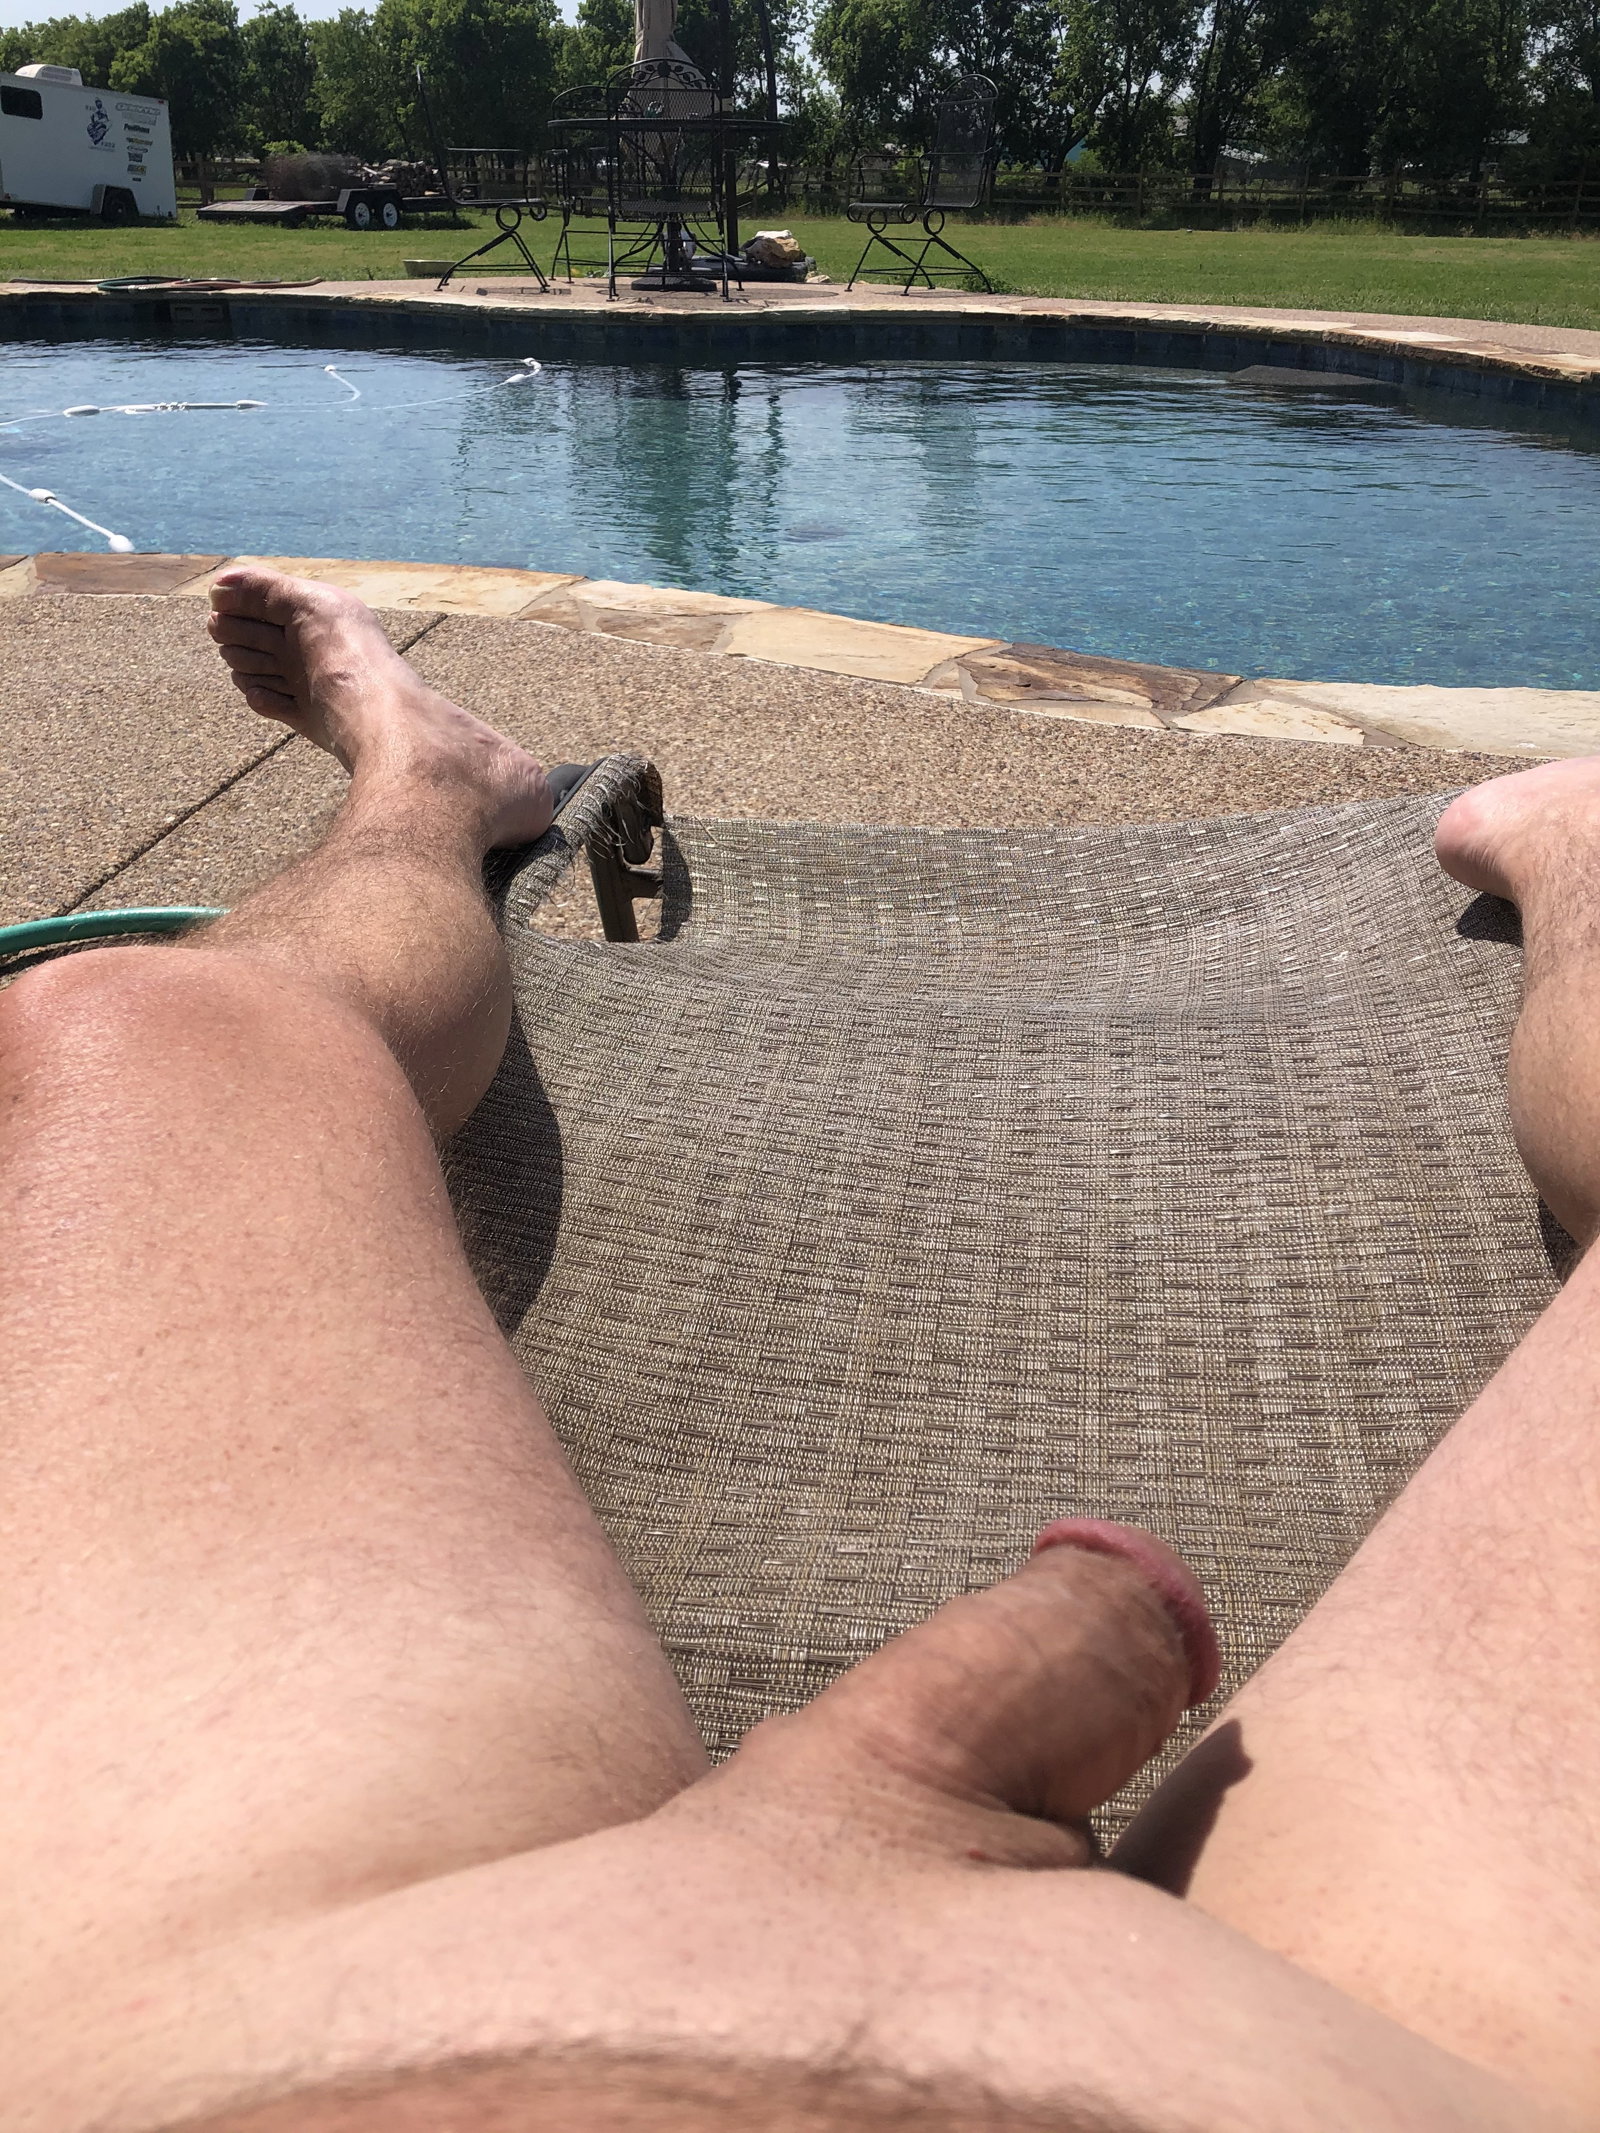 Photo by Yamaha with the username @Yamaha,  May 4, 2020 at 7:54 PM. The post is about the topic Amateur hour and the text says 'Texas
pool time'